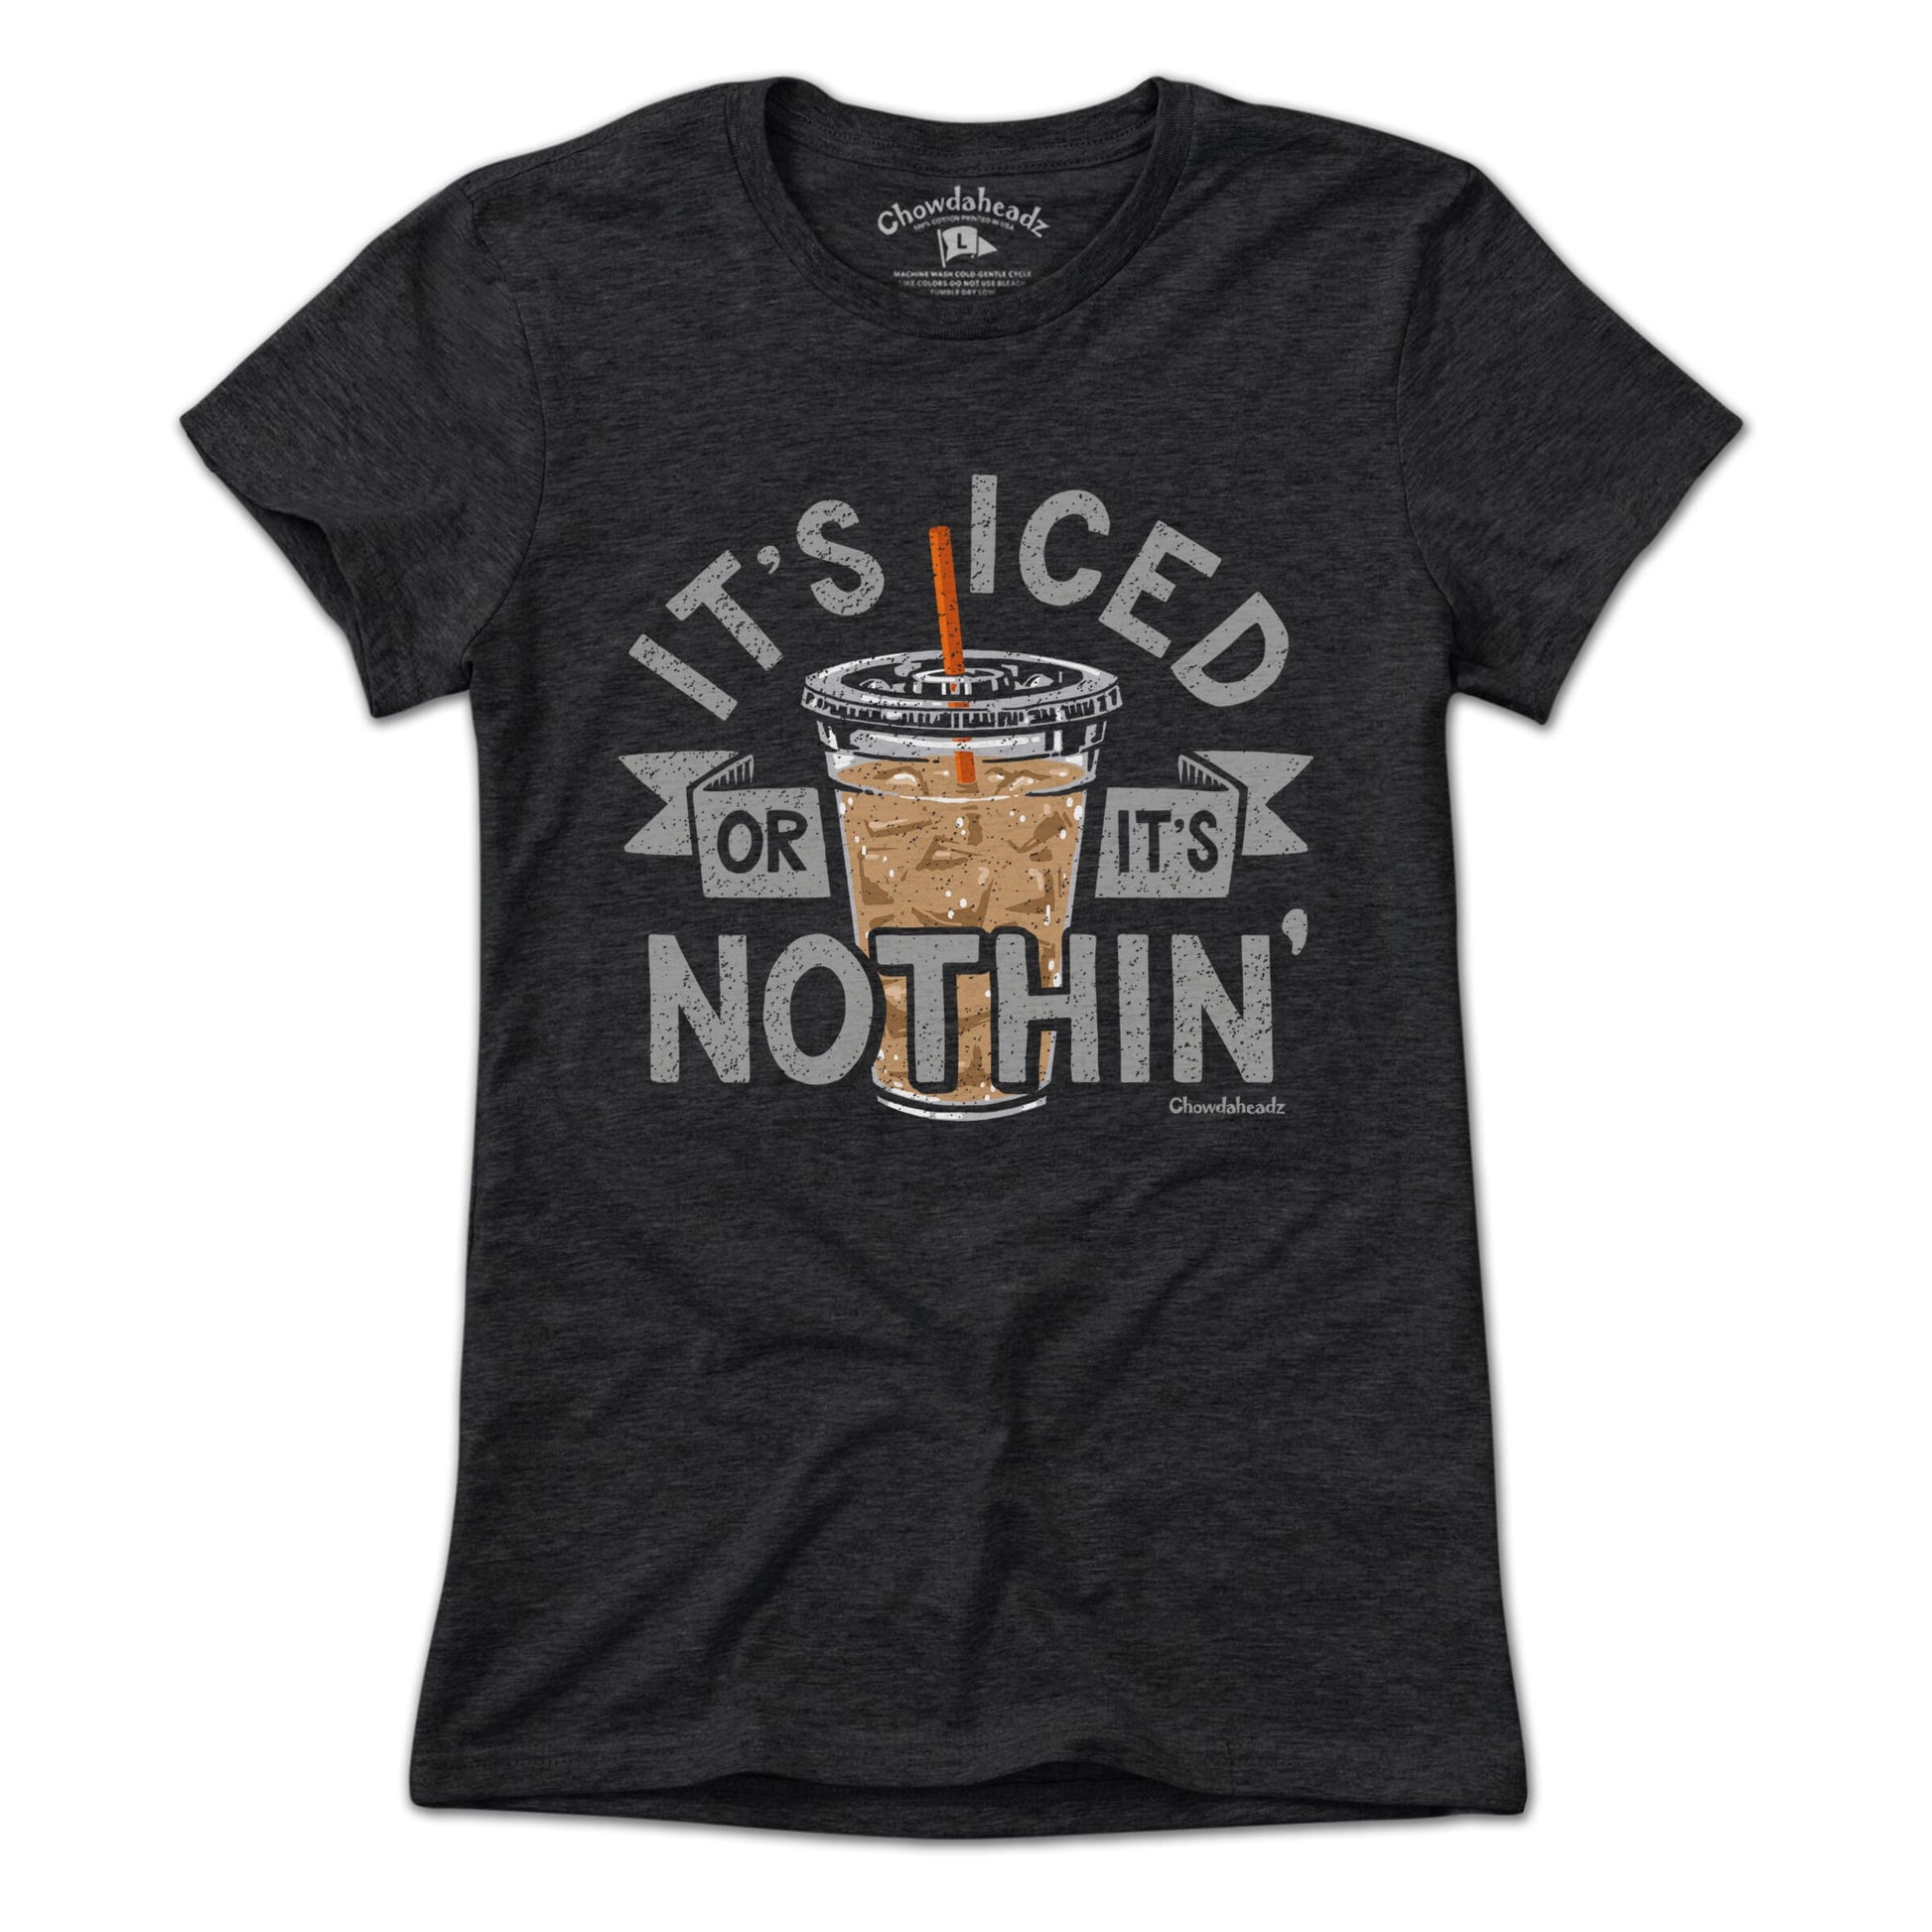 It's Iced Or It's Nothin' Coffee T-Shirt - Chowdaheadz